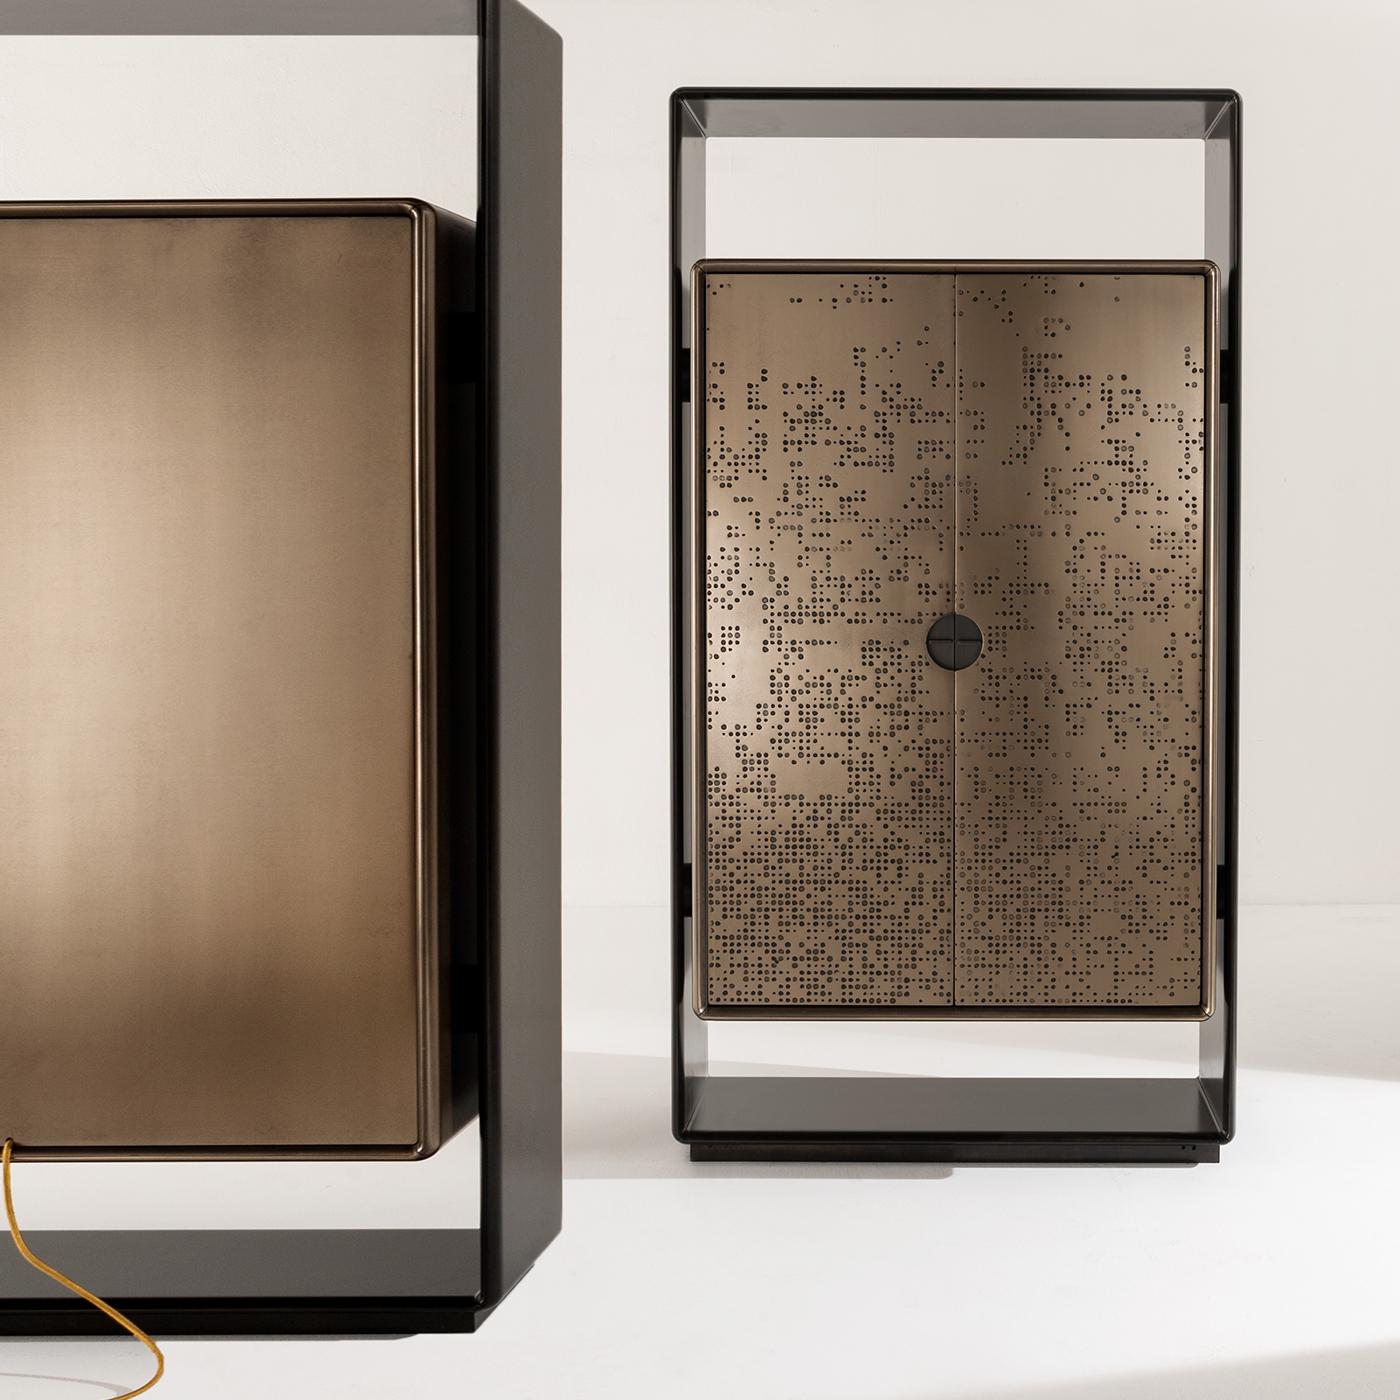 This cabinet features a structure in wood or lacquered wood. Its doors have a liquid metal finish and textured, Unlimited motif which enhances its warmth and energy with a 3D look. The interior is lacquered in liquid metal and includes glass and